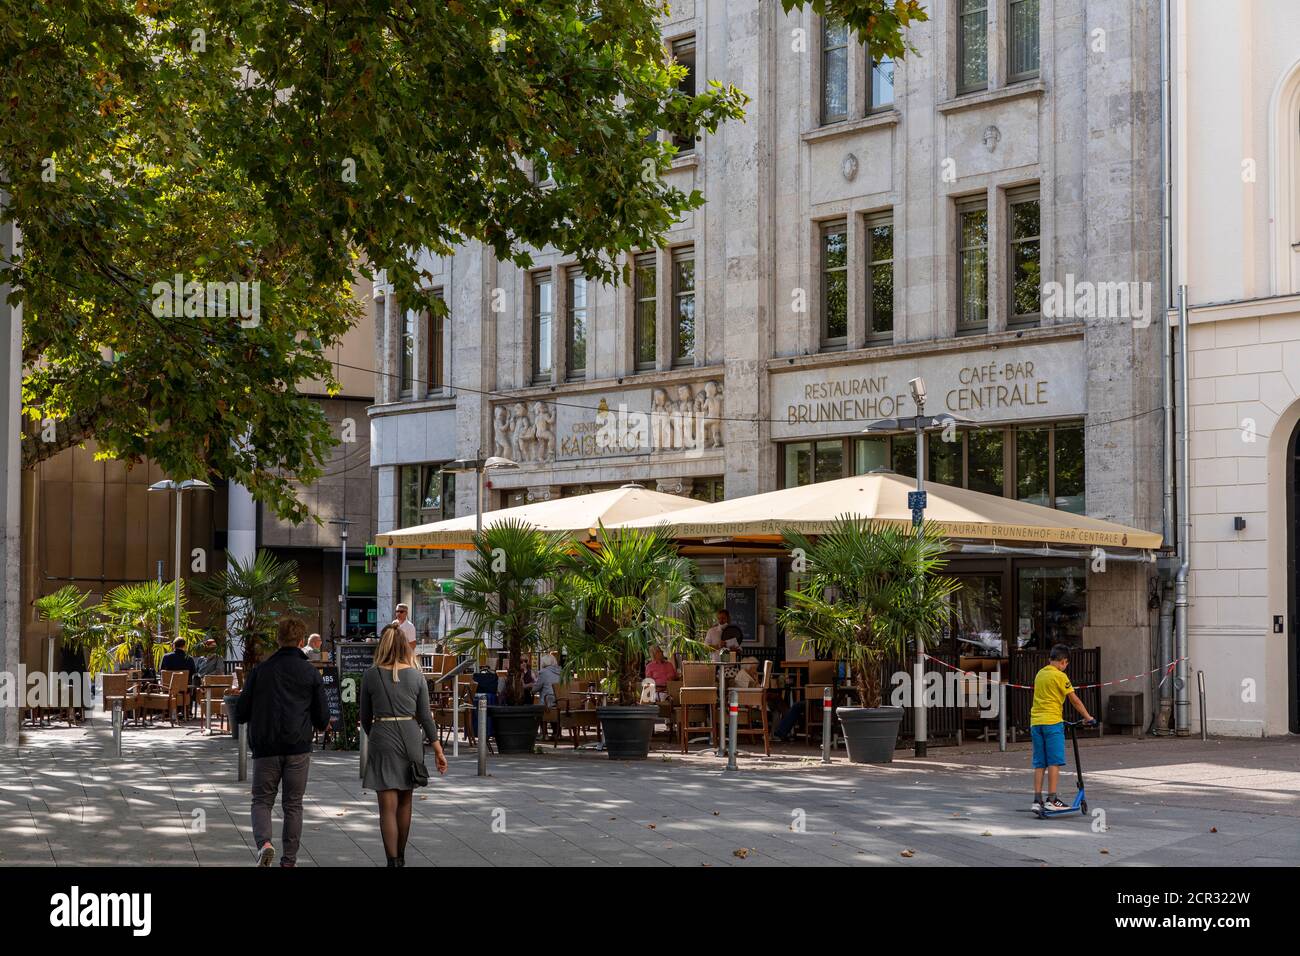 Old town in Hannover is full of small cafes and restaurants where people can enjoy their food and drinks. Sunny weekend day are good for that. Stock Photo